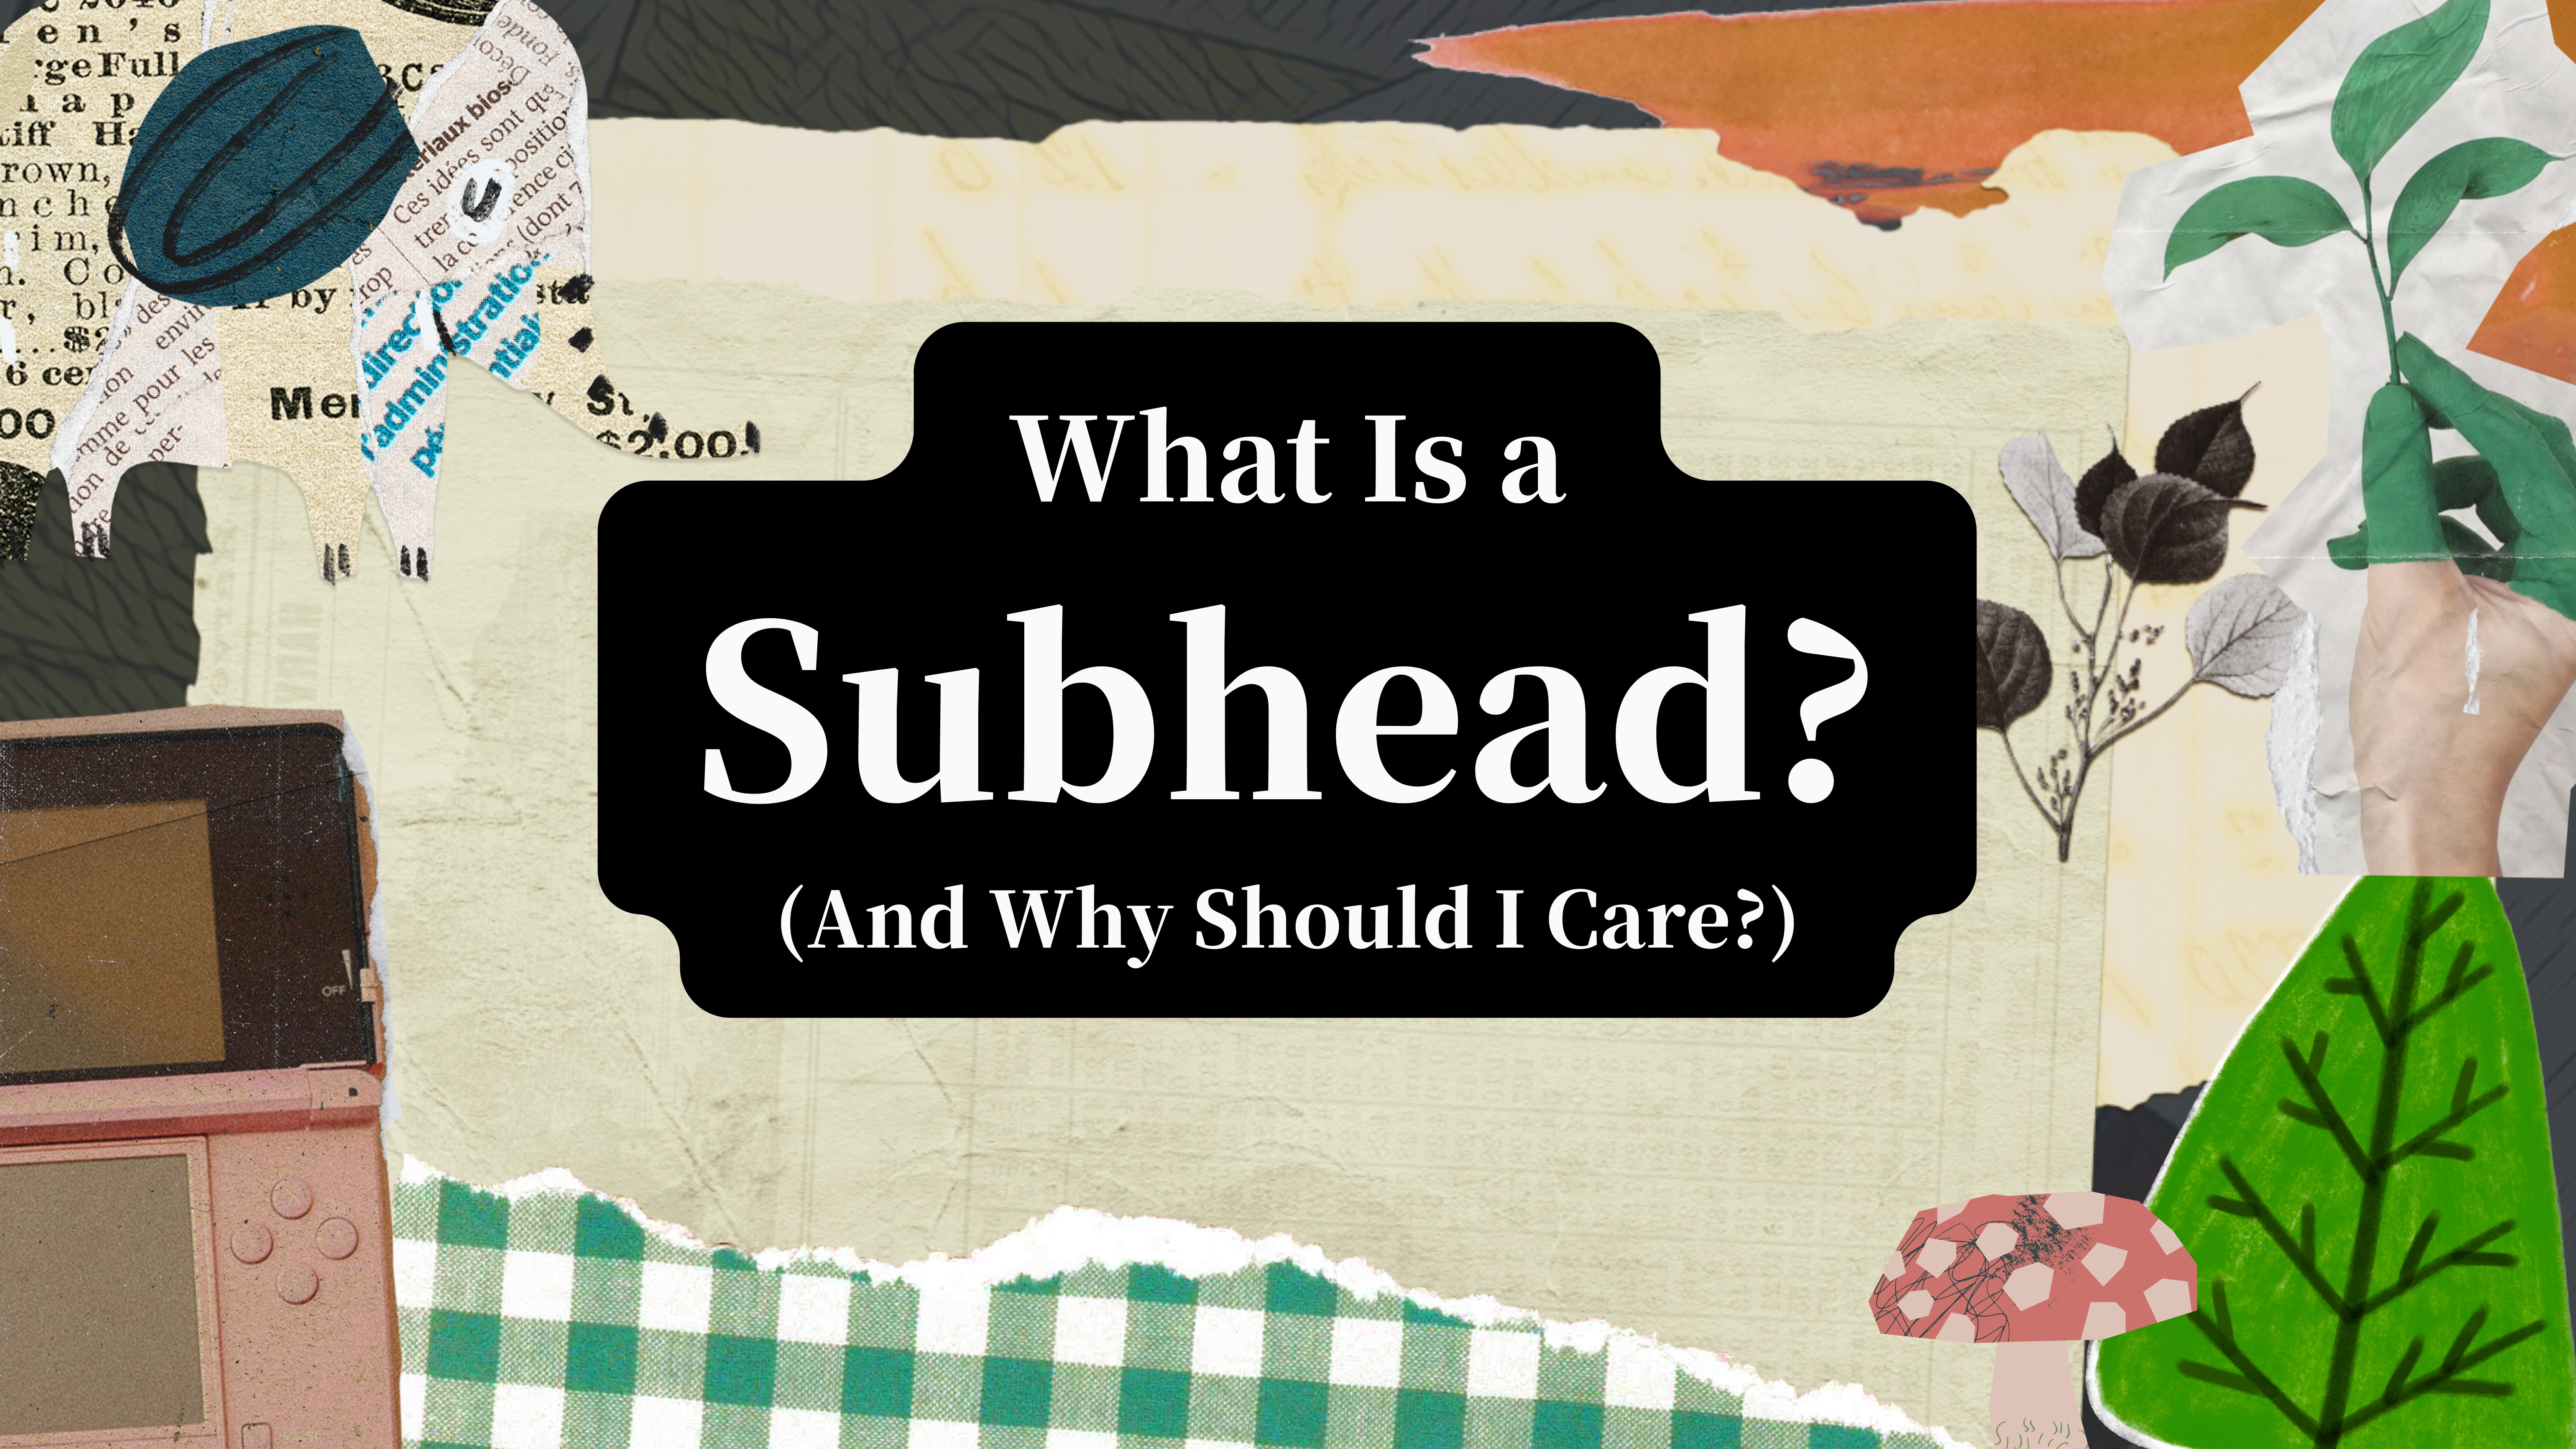 What Is a Subheading? (And Why Should I Care?)